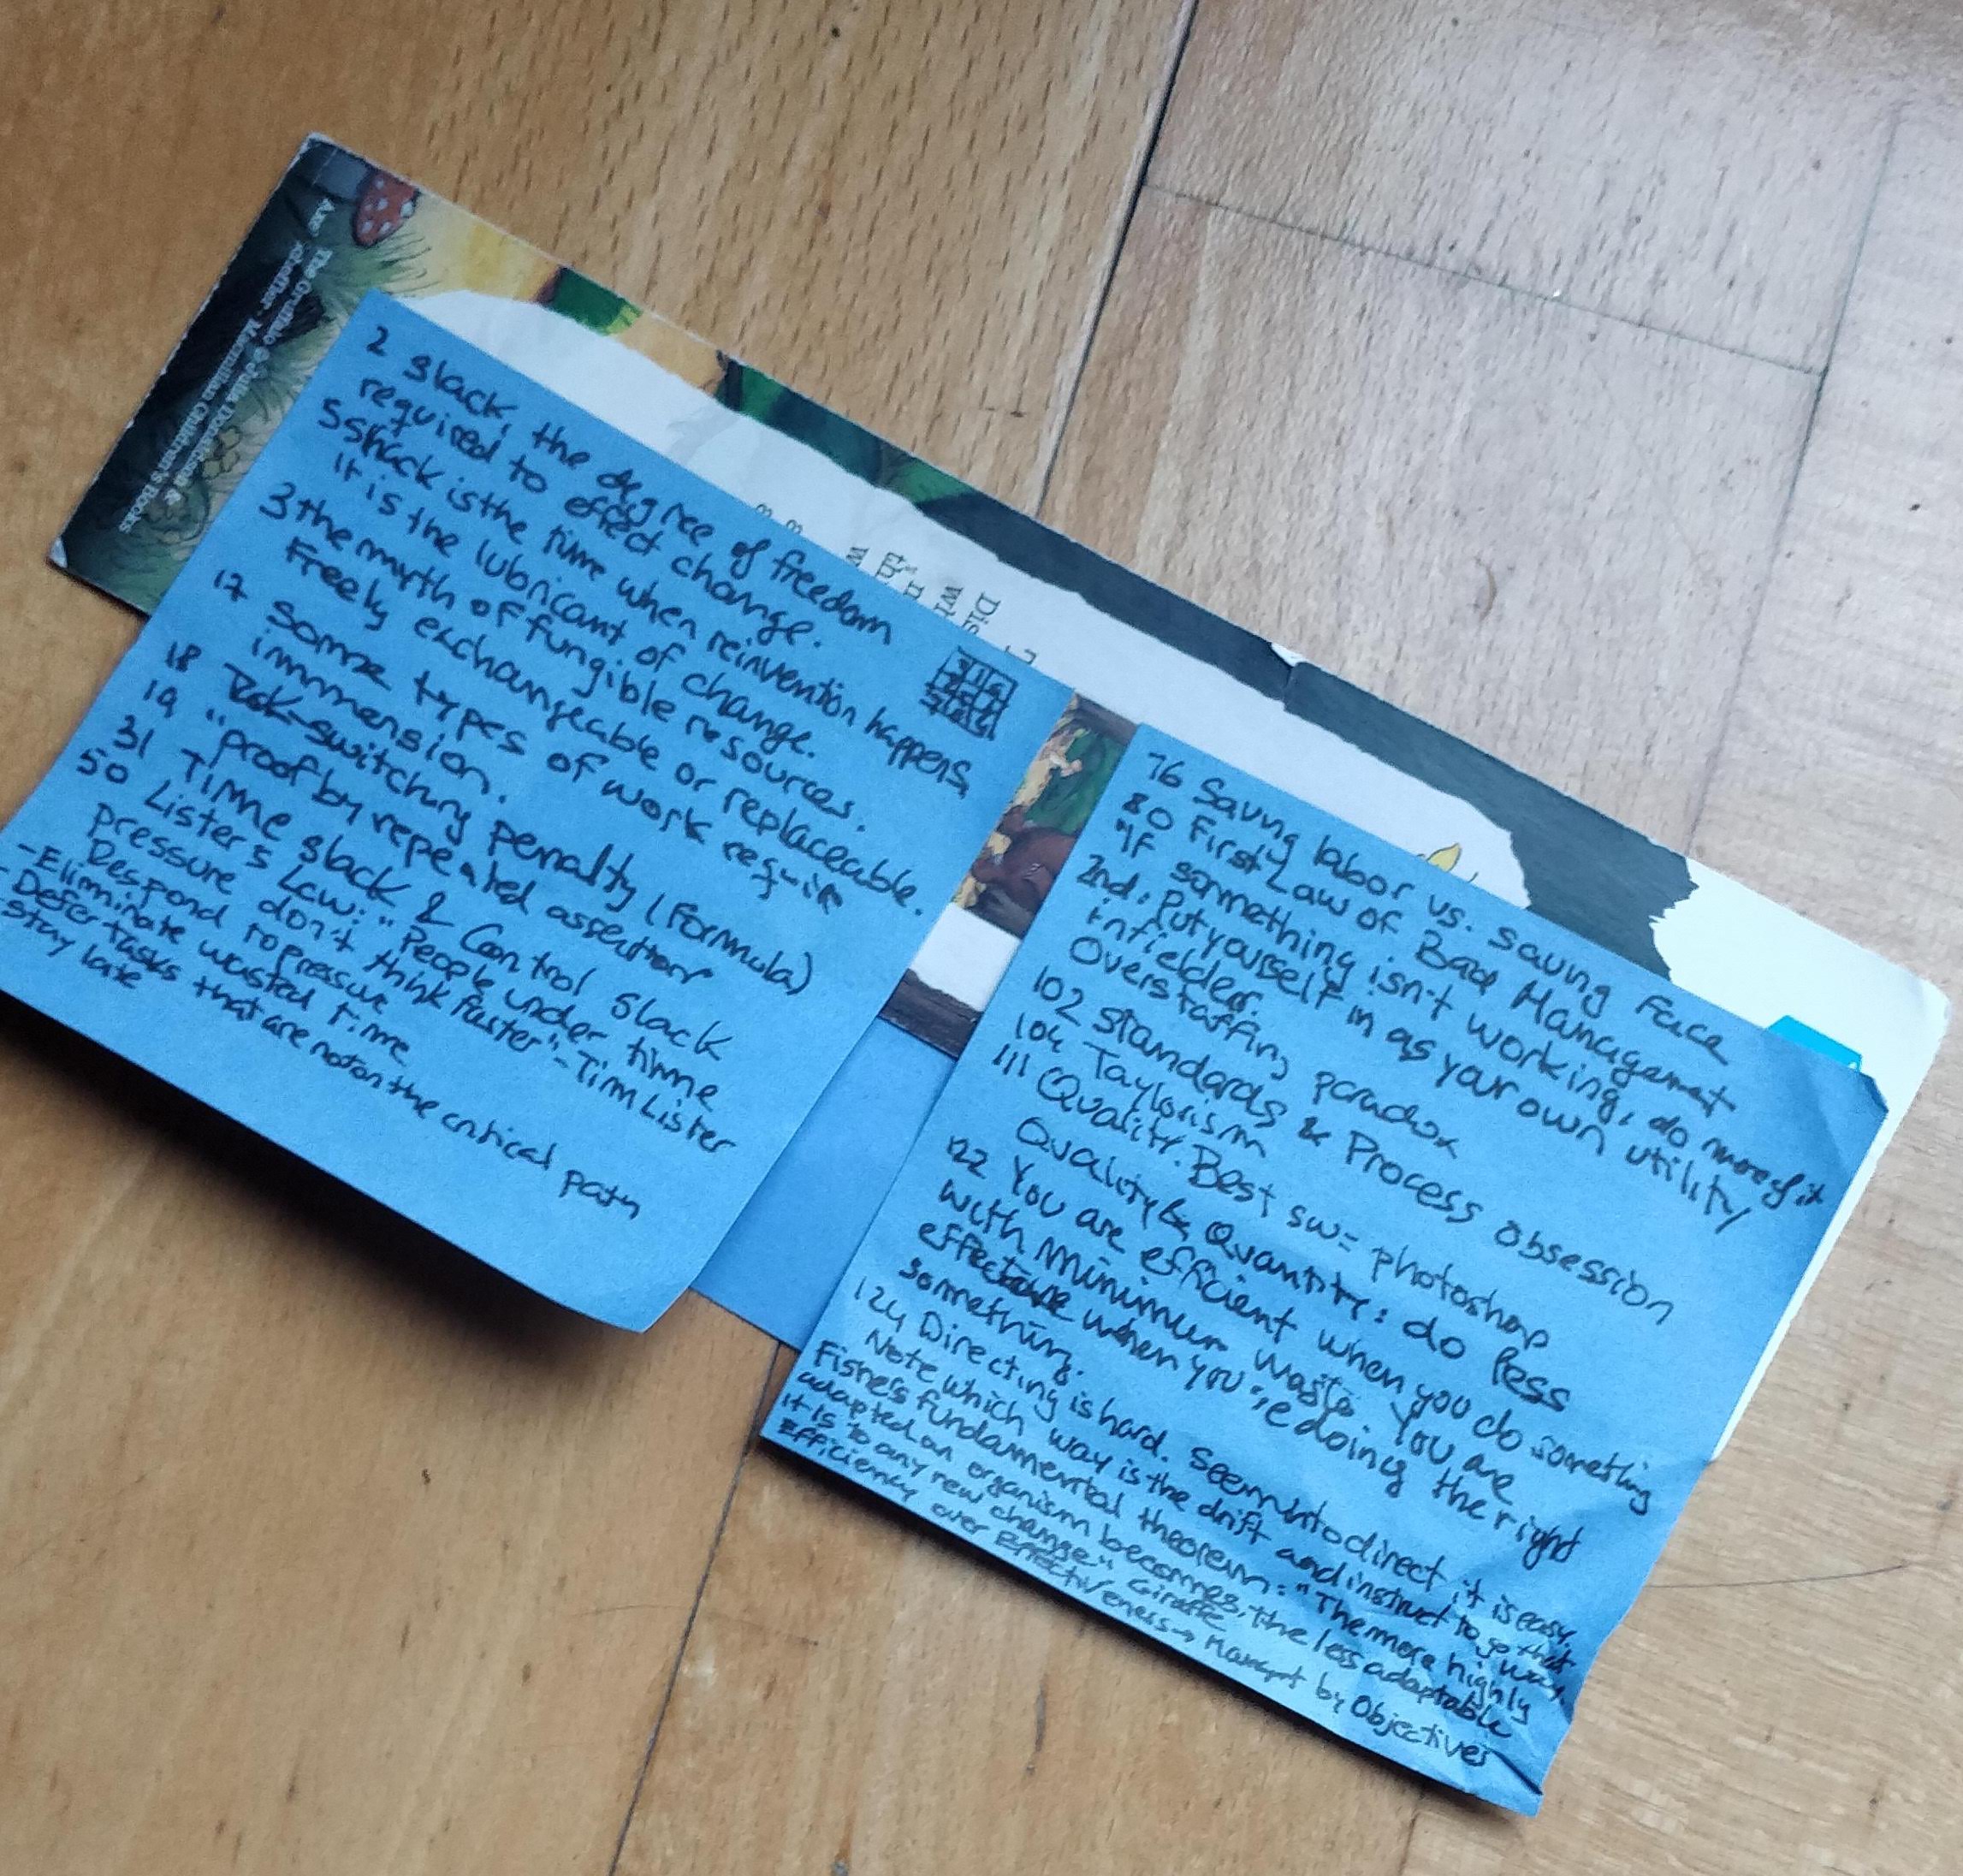 A bookmark with post-it notes